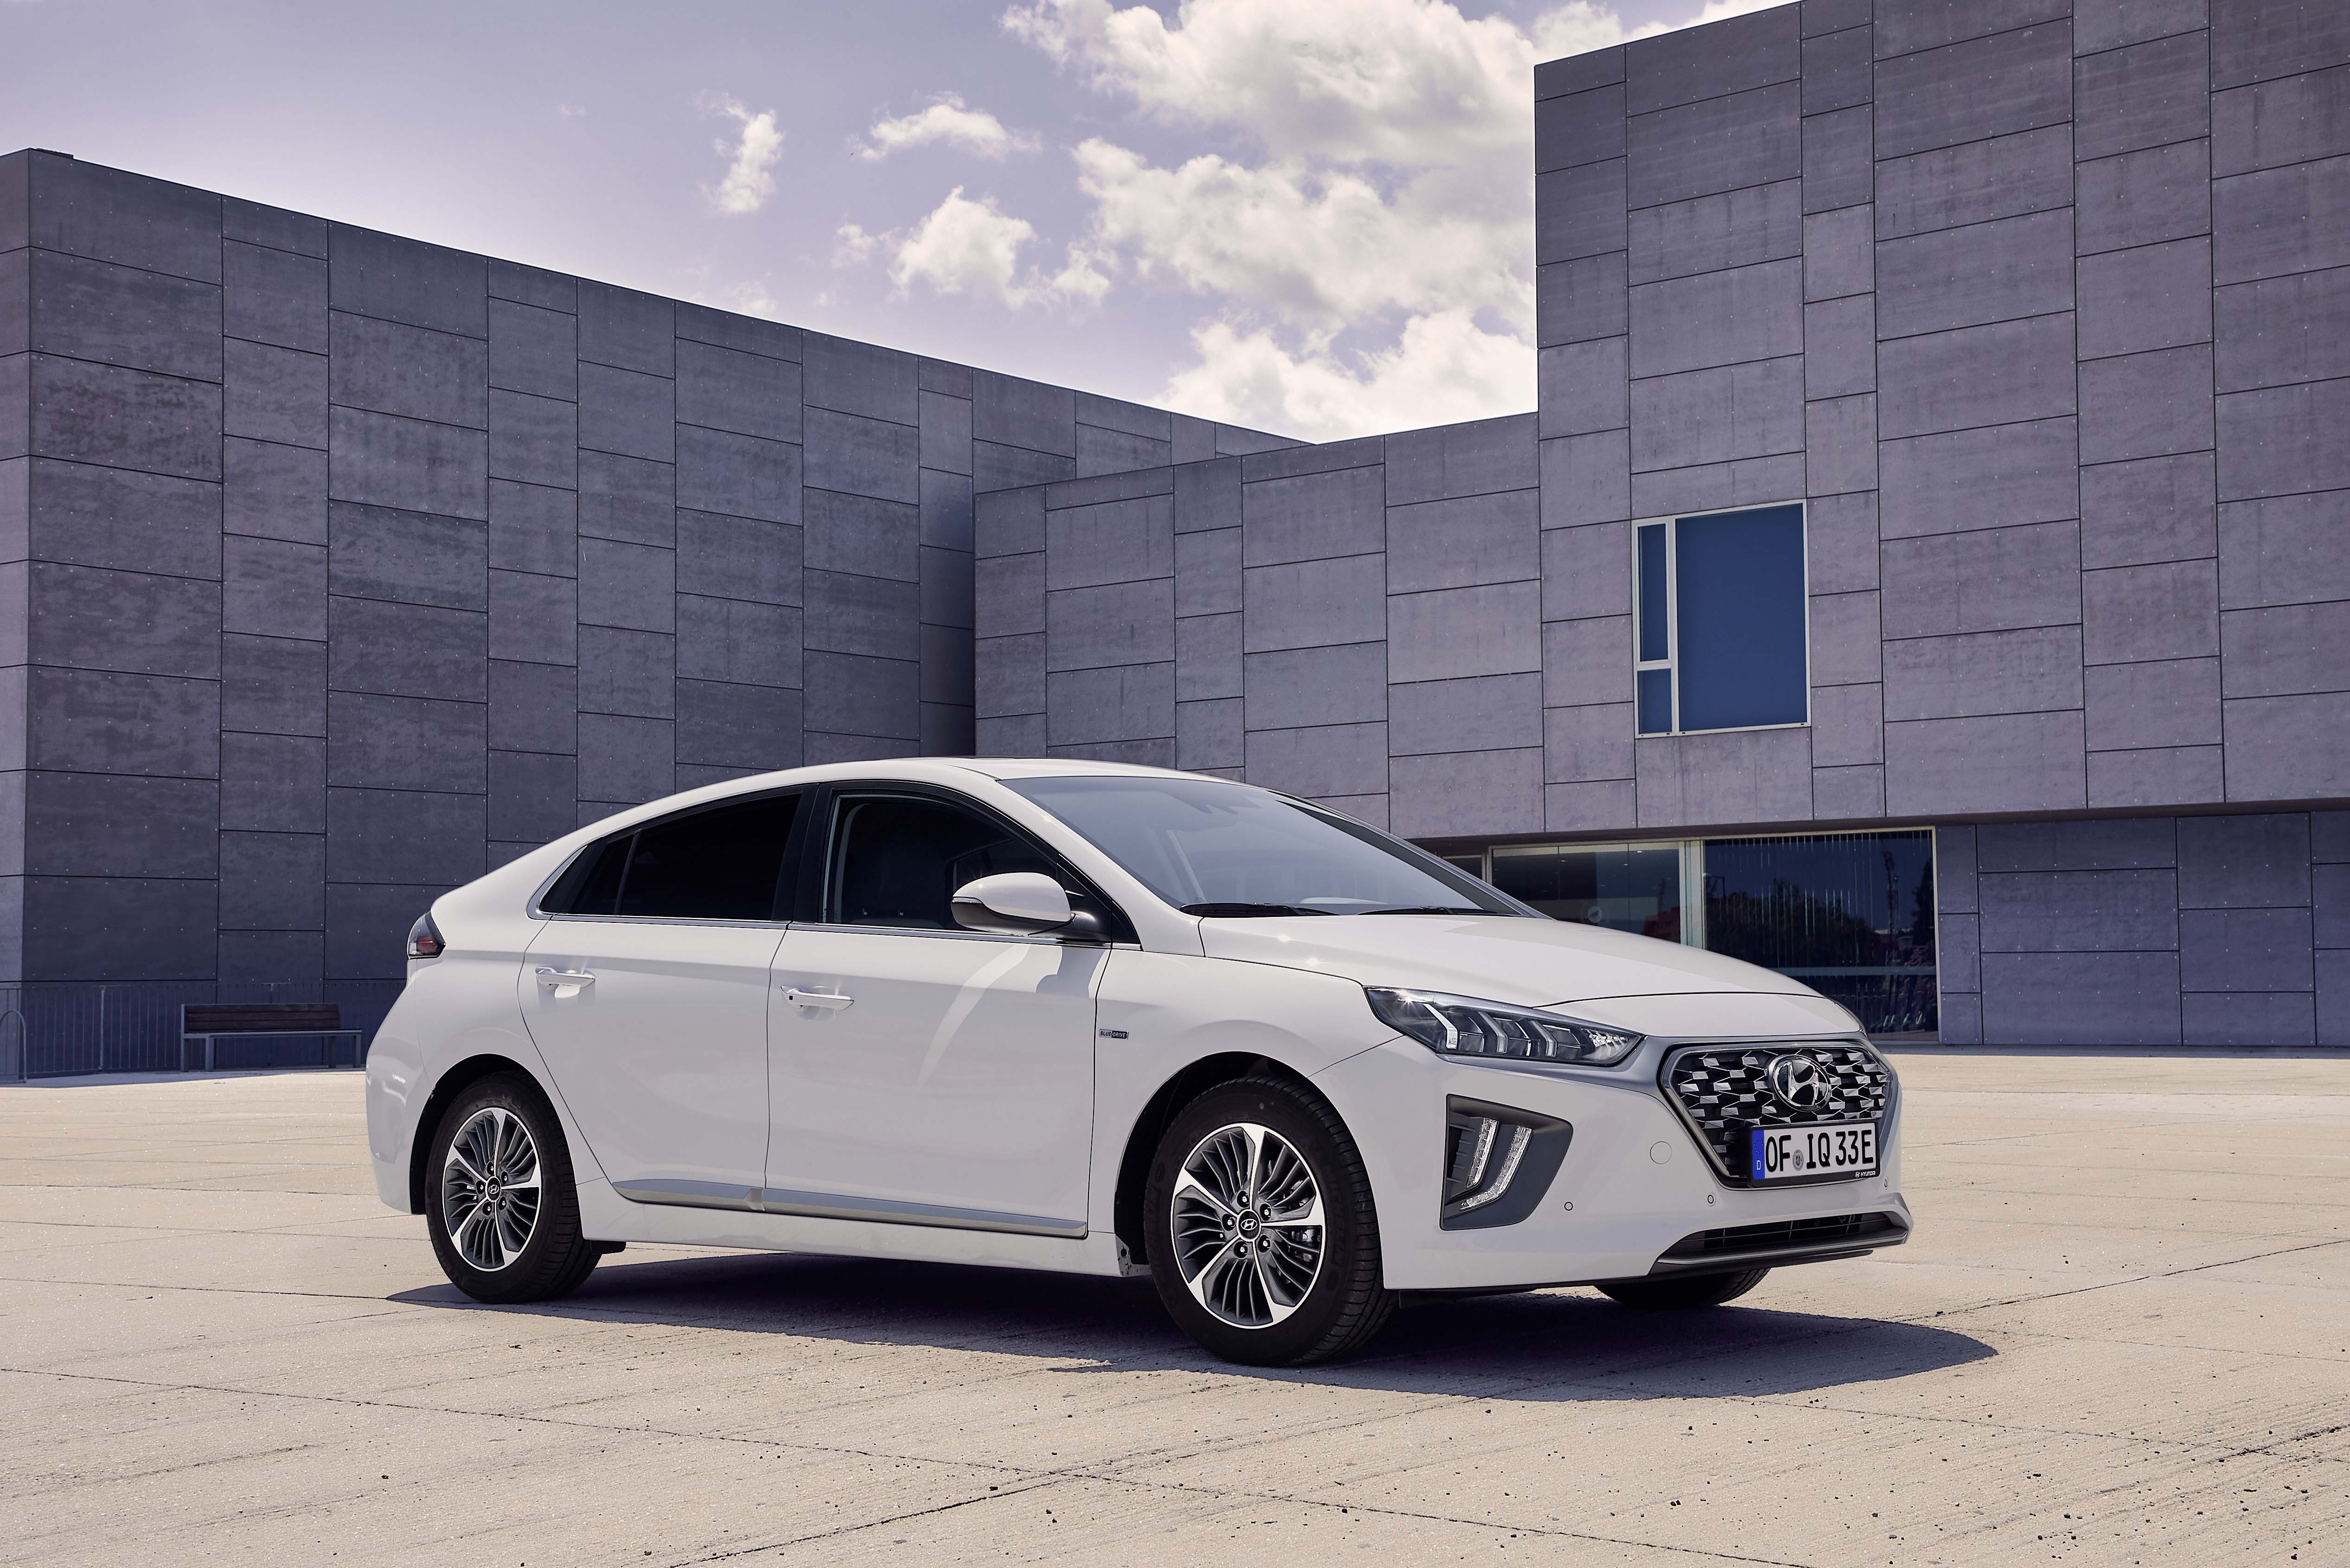 Facelifted Hyundai Ioniq on sale now Carbuyer